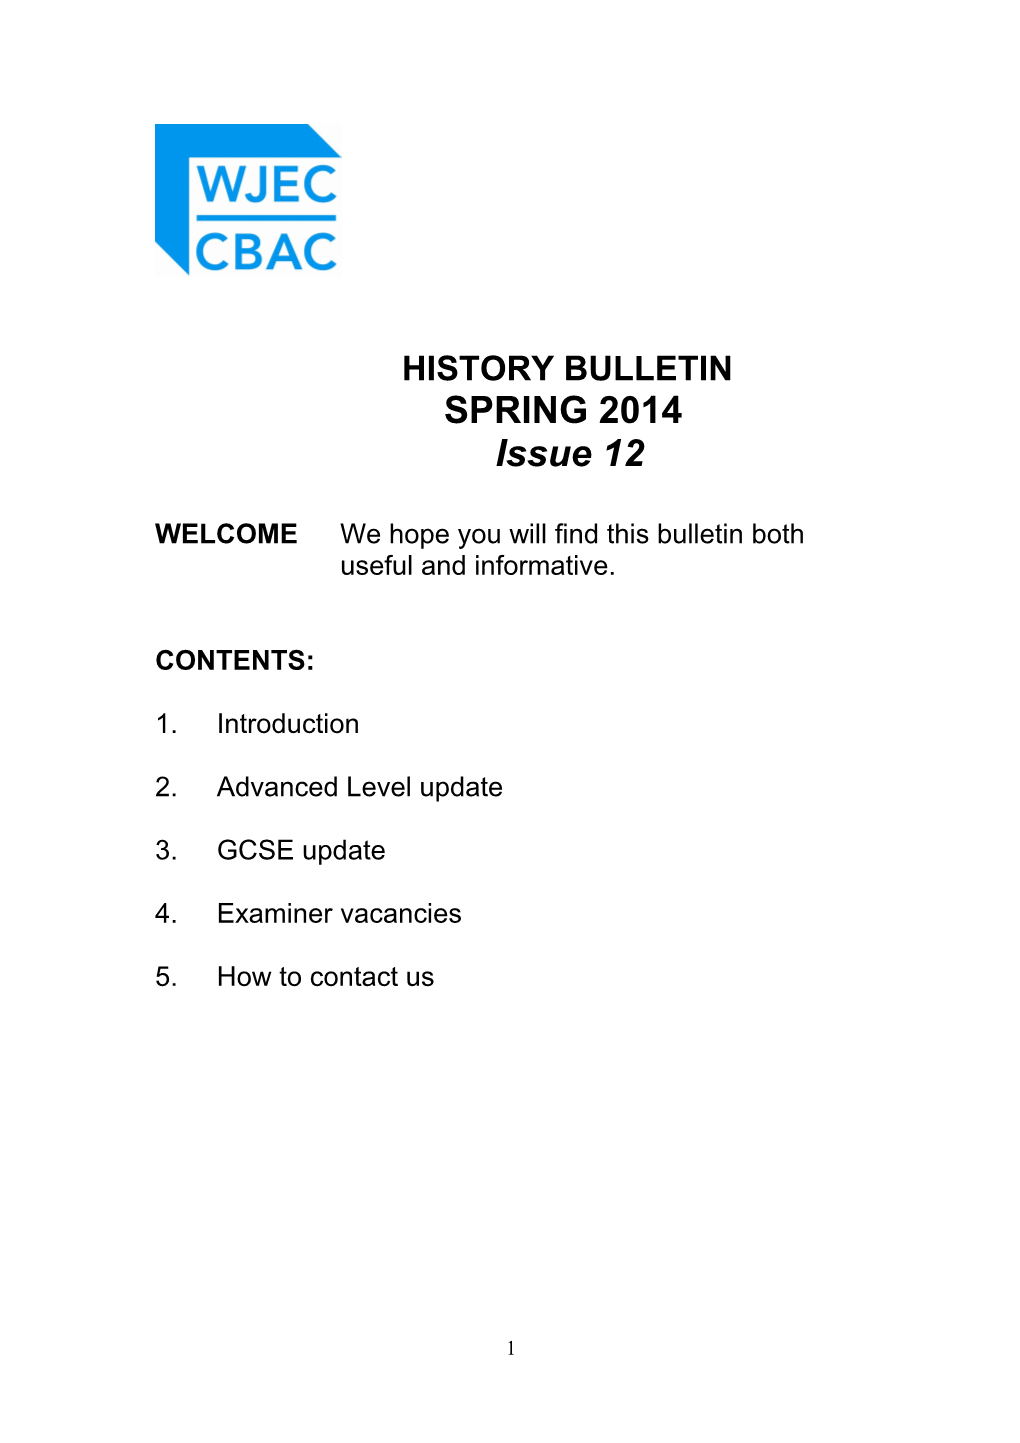 WELCOME We Hope You Will Find This Bulletin Both Useful and Informative